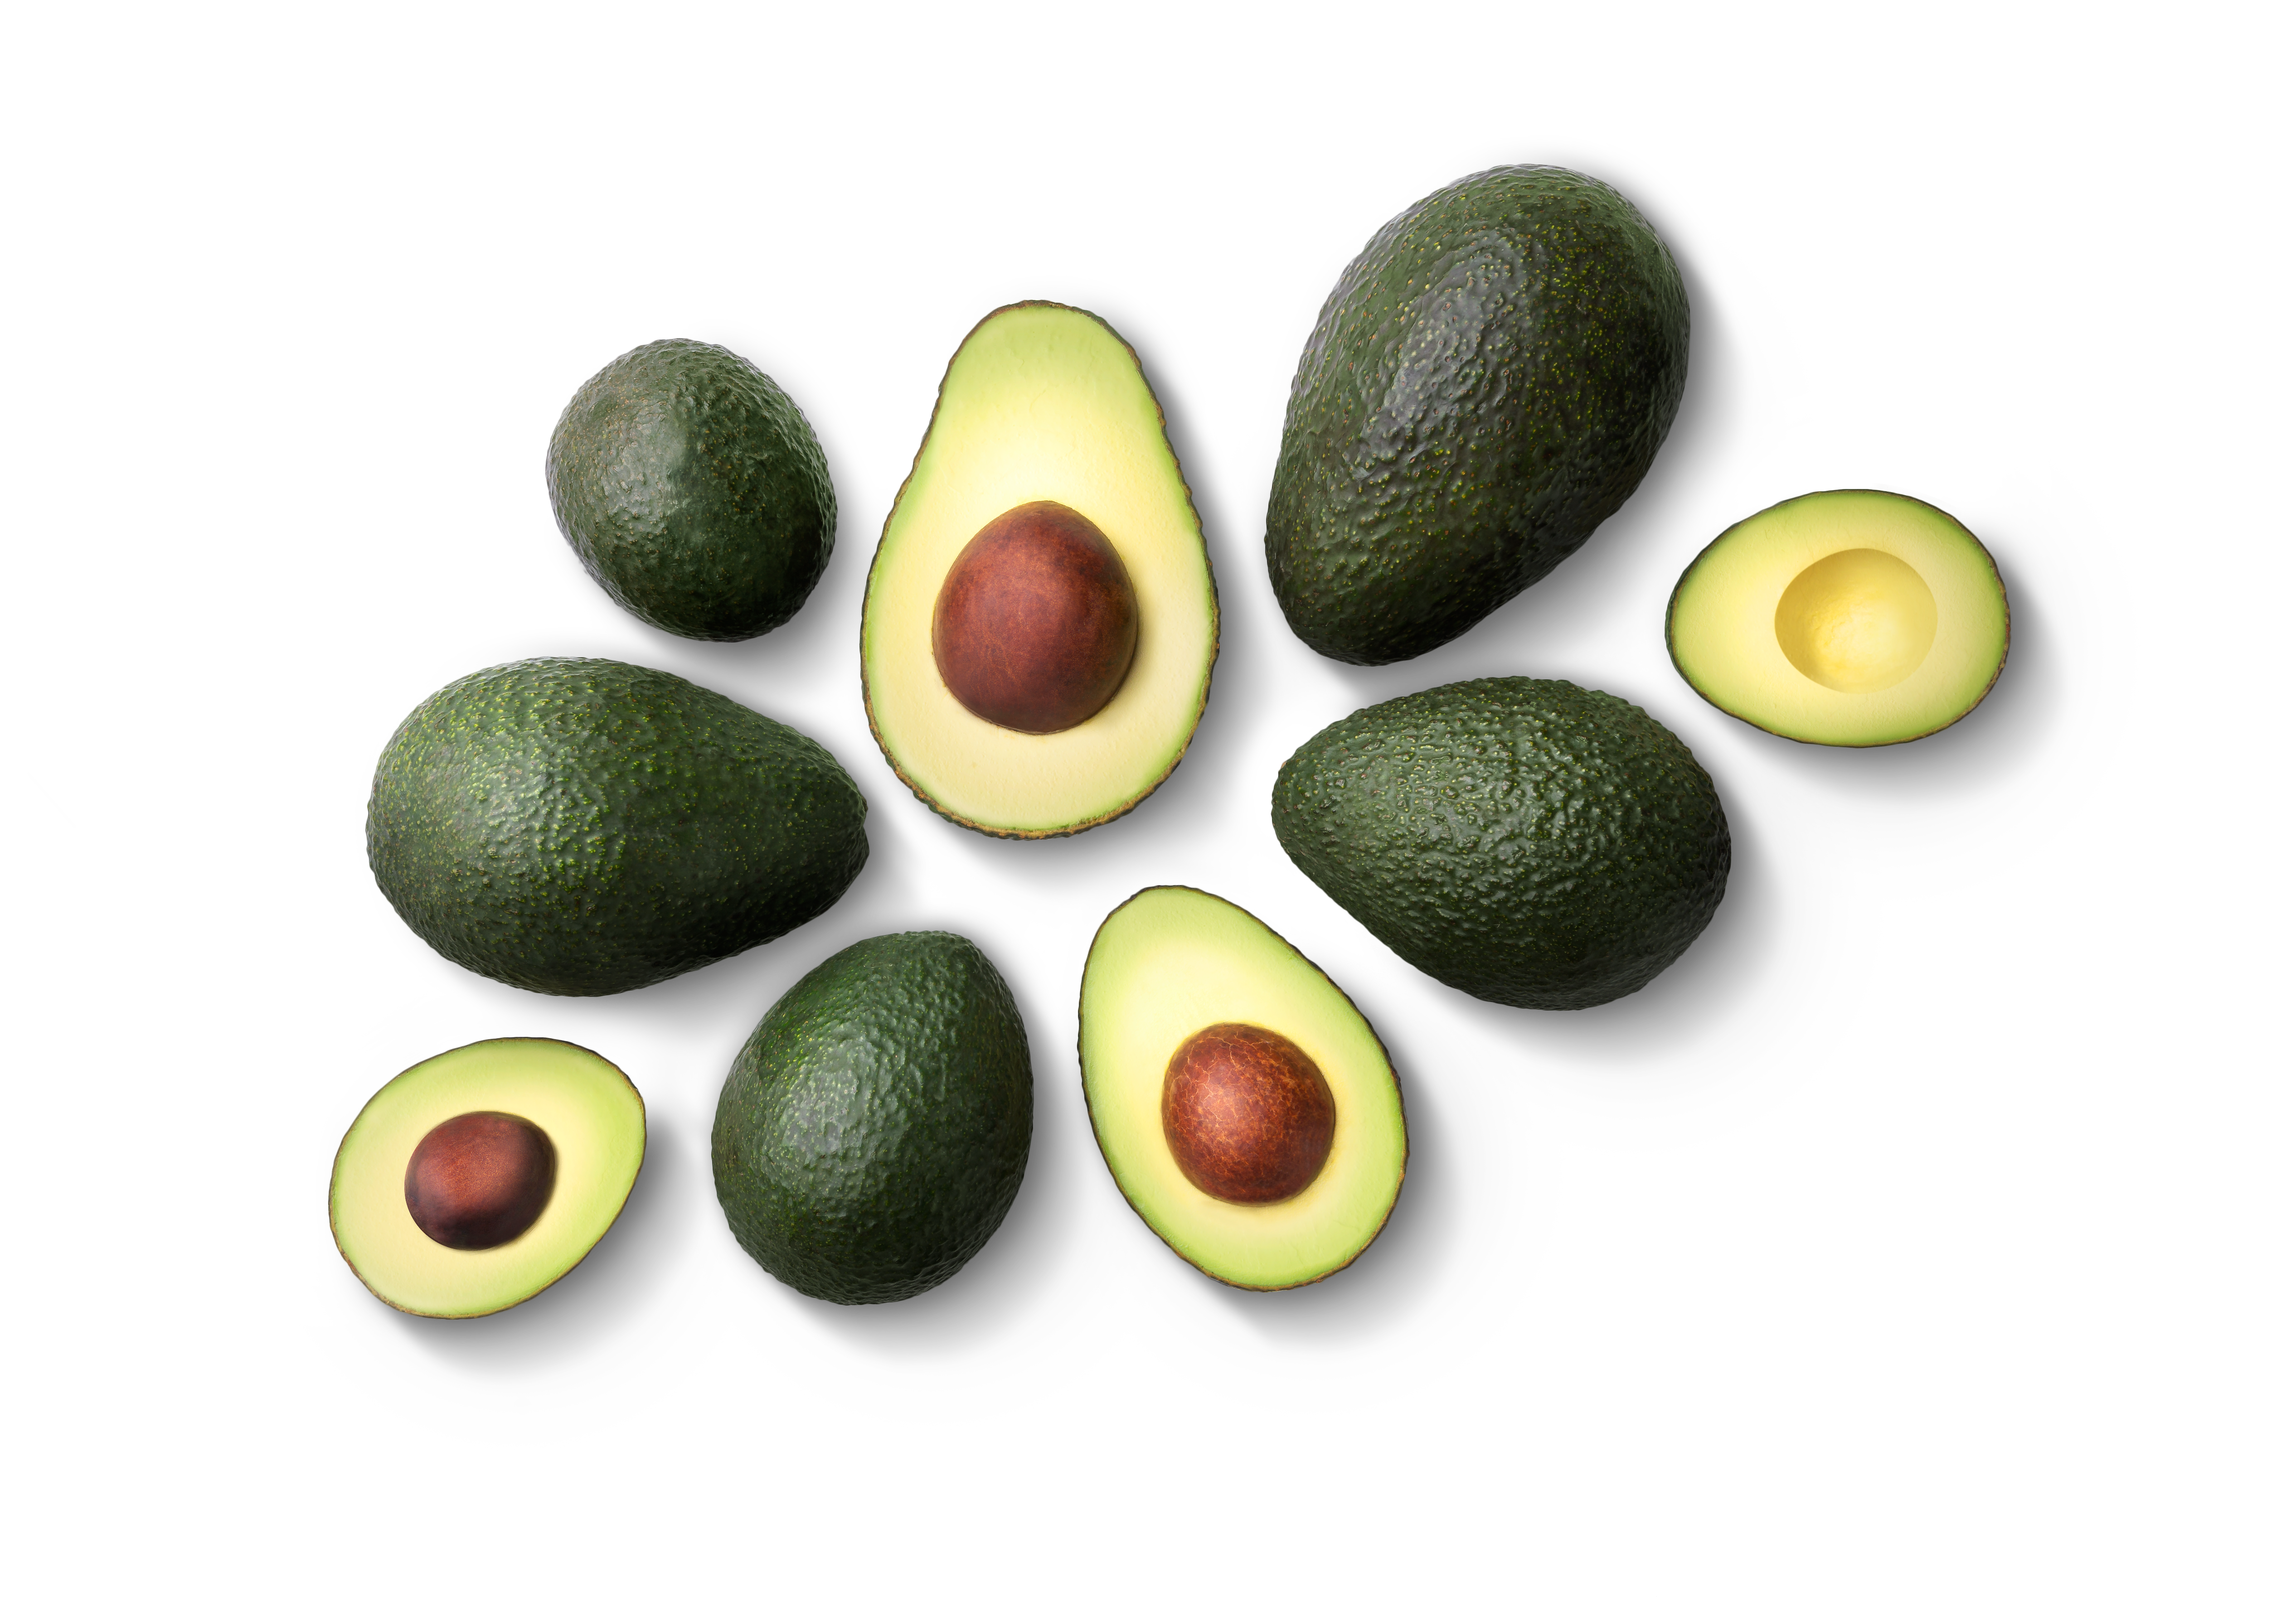 Image of avocados